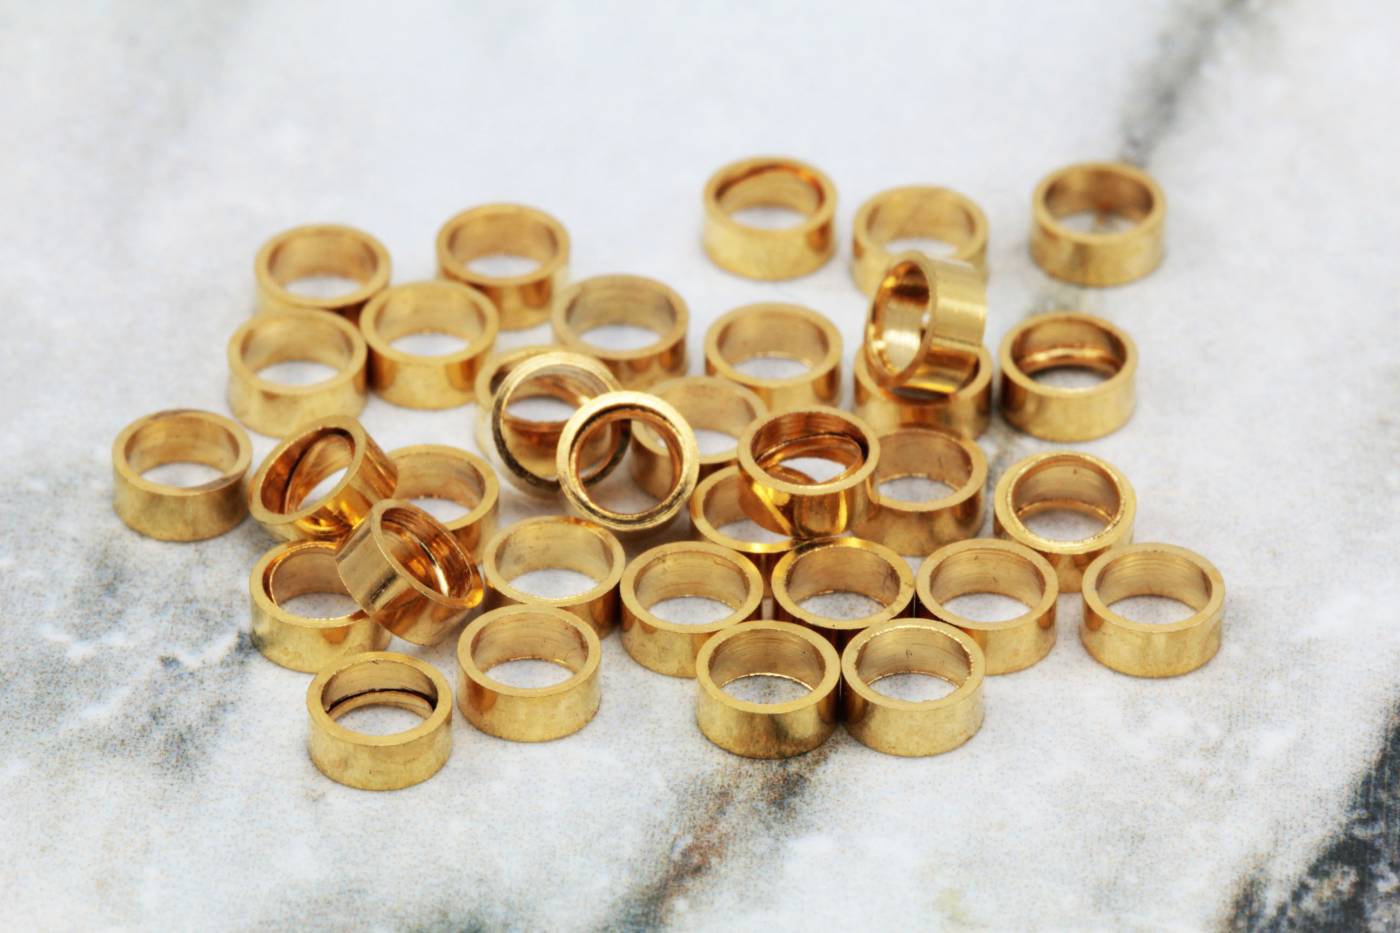 5mm-gold-brass-ring-spacer-bead-findings